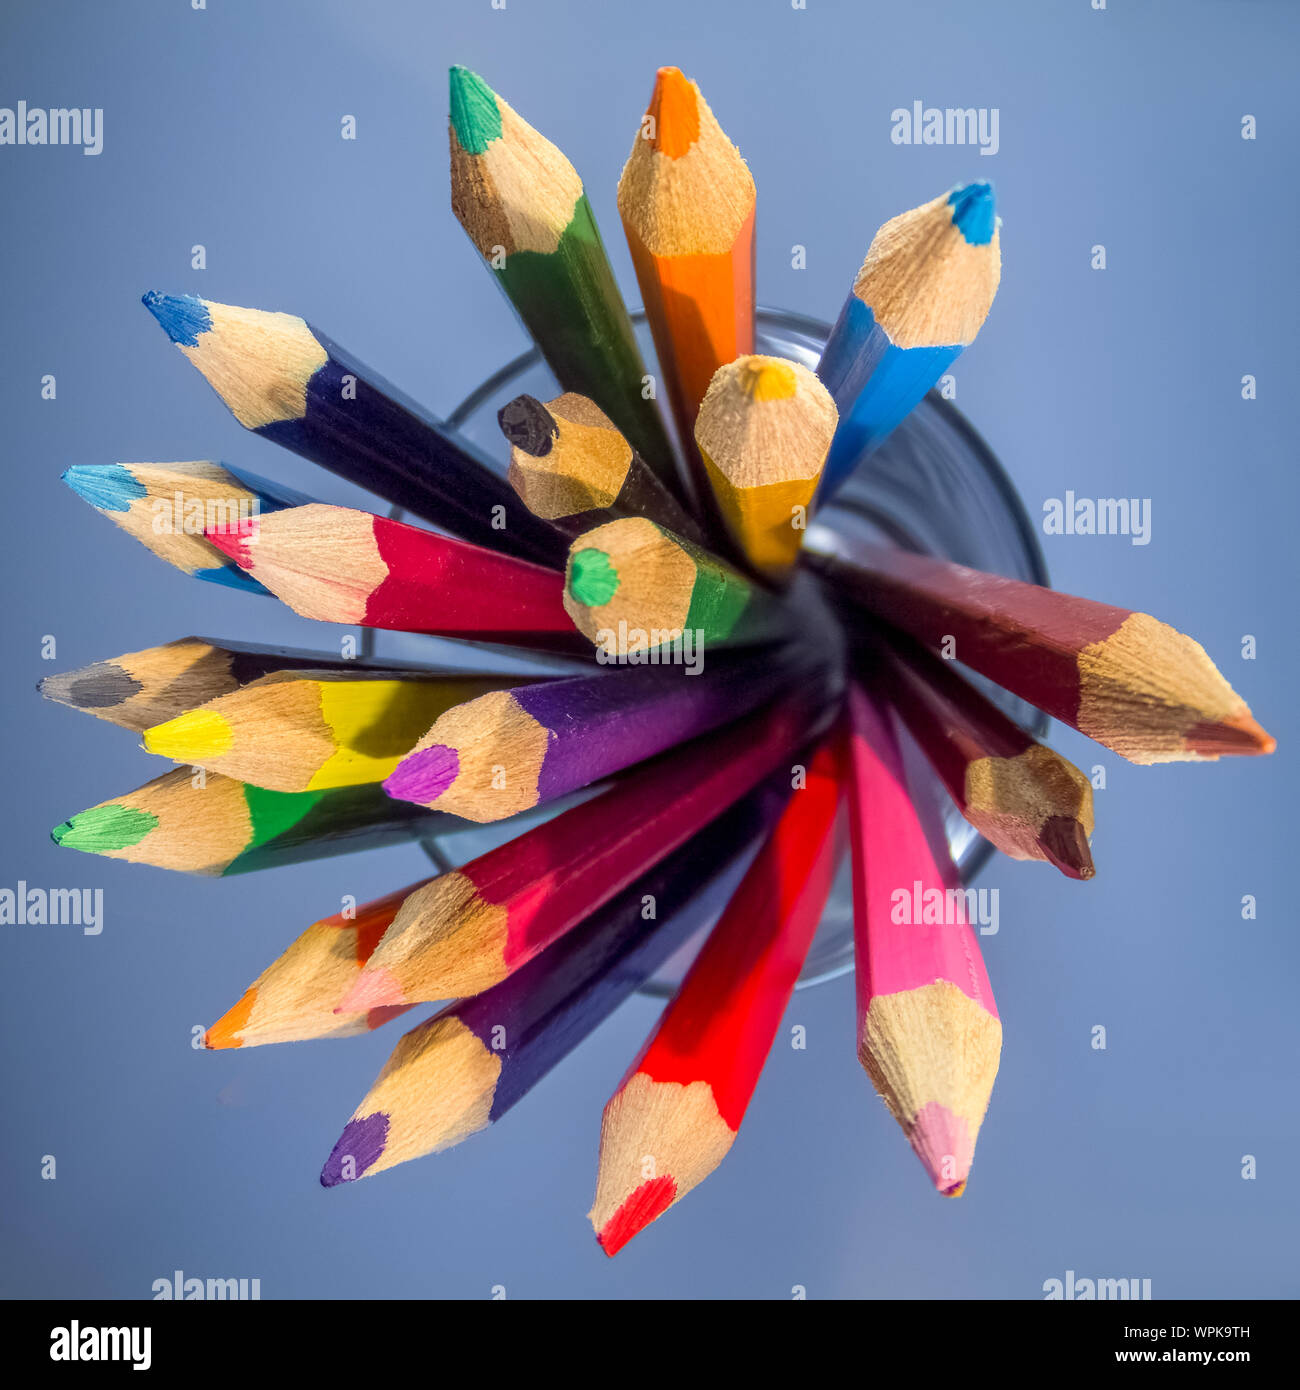 A group of coloured pencils in a glass tumbler Stock Photo